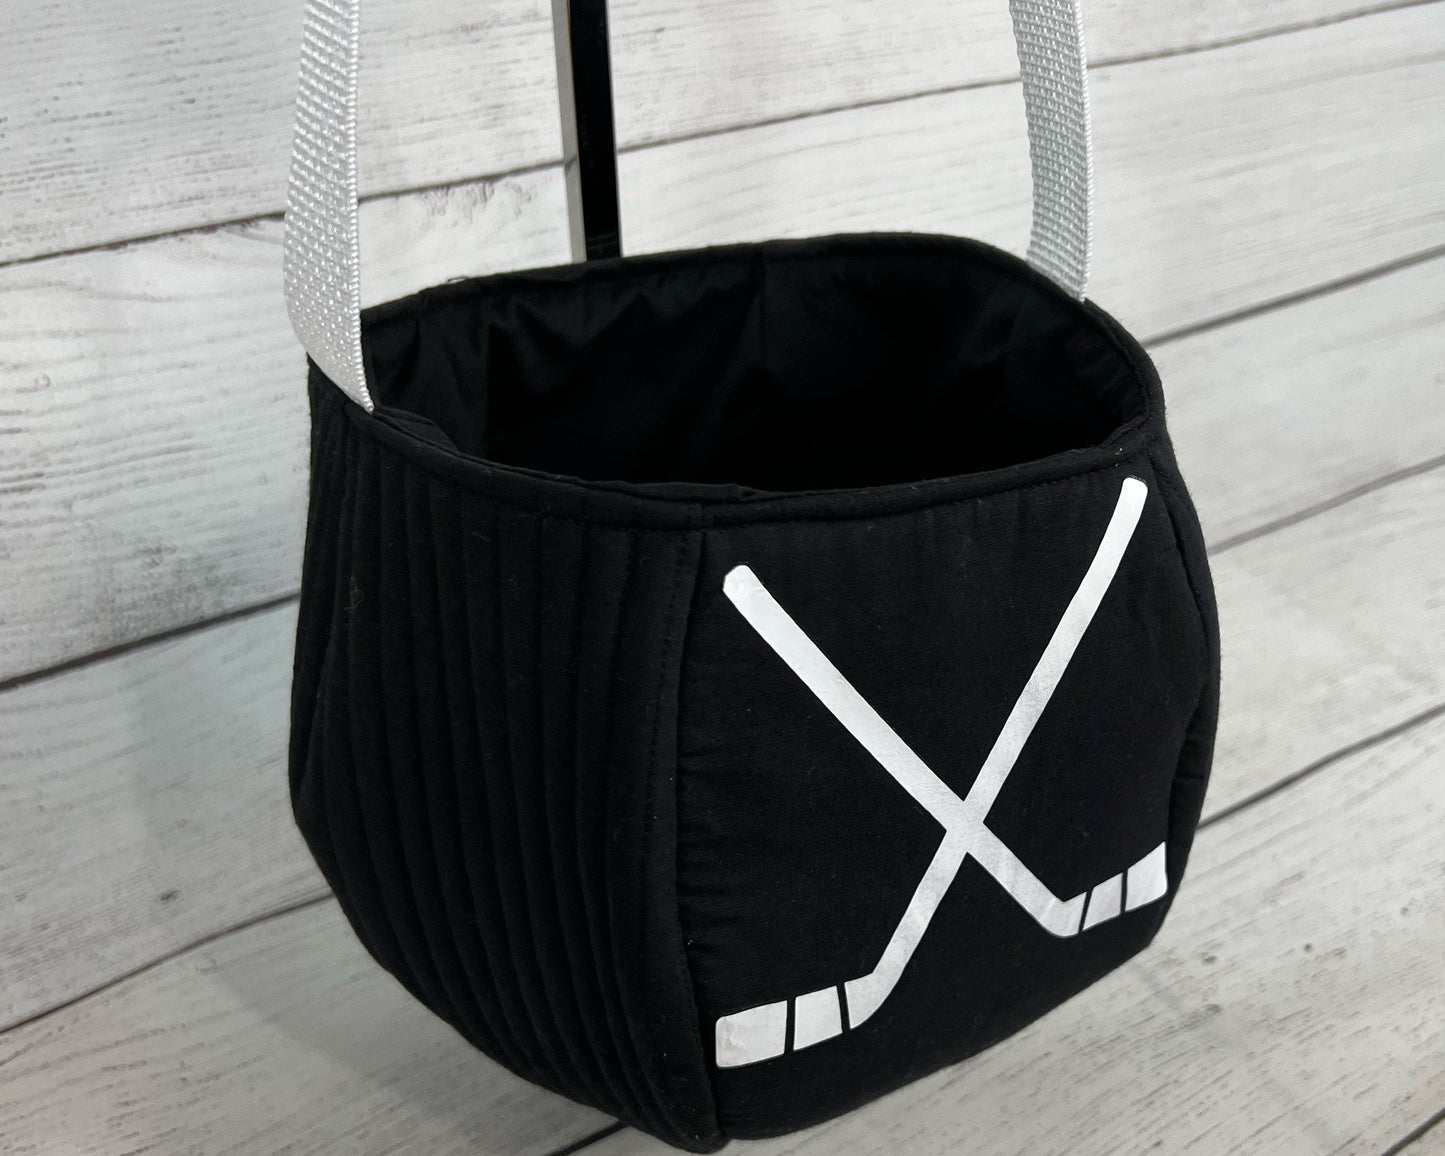 Hockey Themed Tote Bag - Hockey Sticks - Hockey Puck - Present- Everyday - Holiday - Easter - Halloween - Party - Gifts